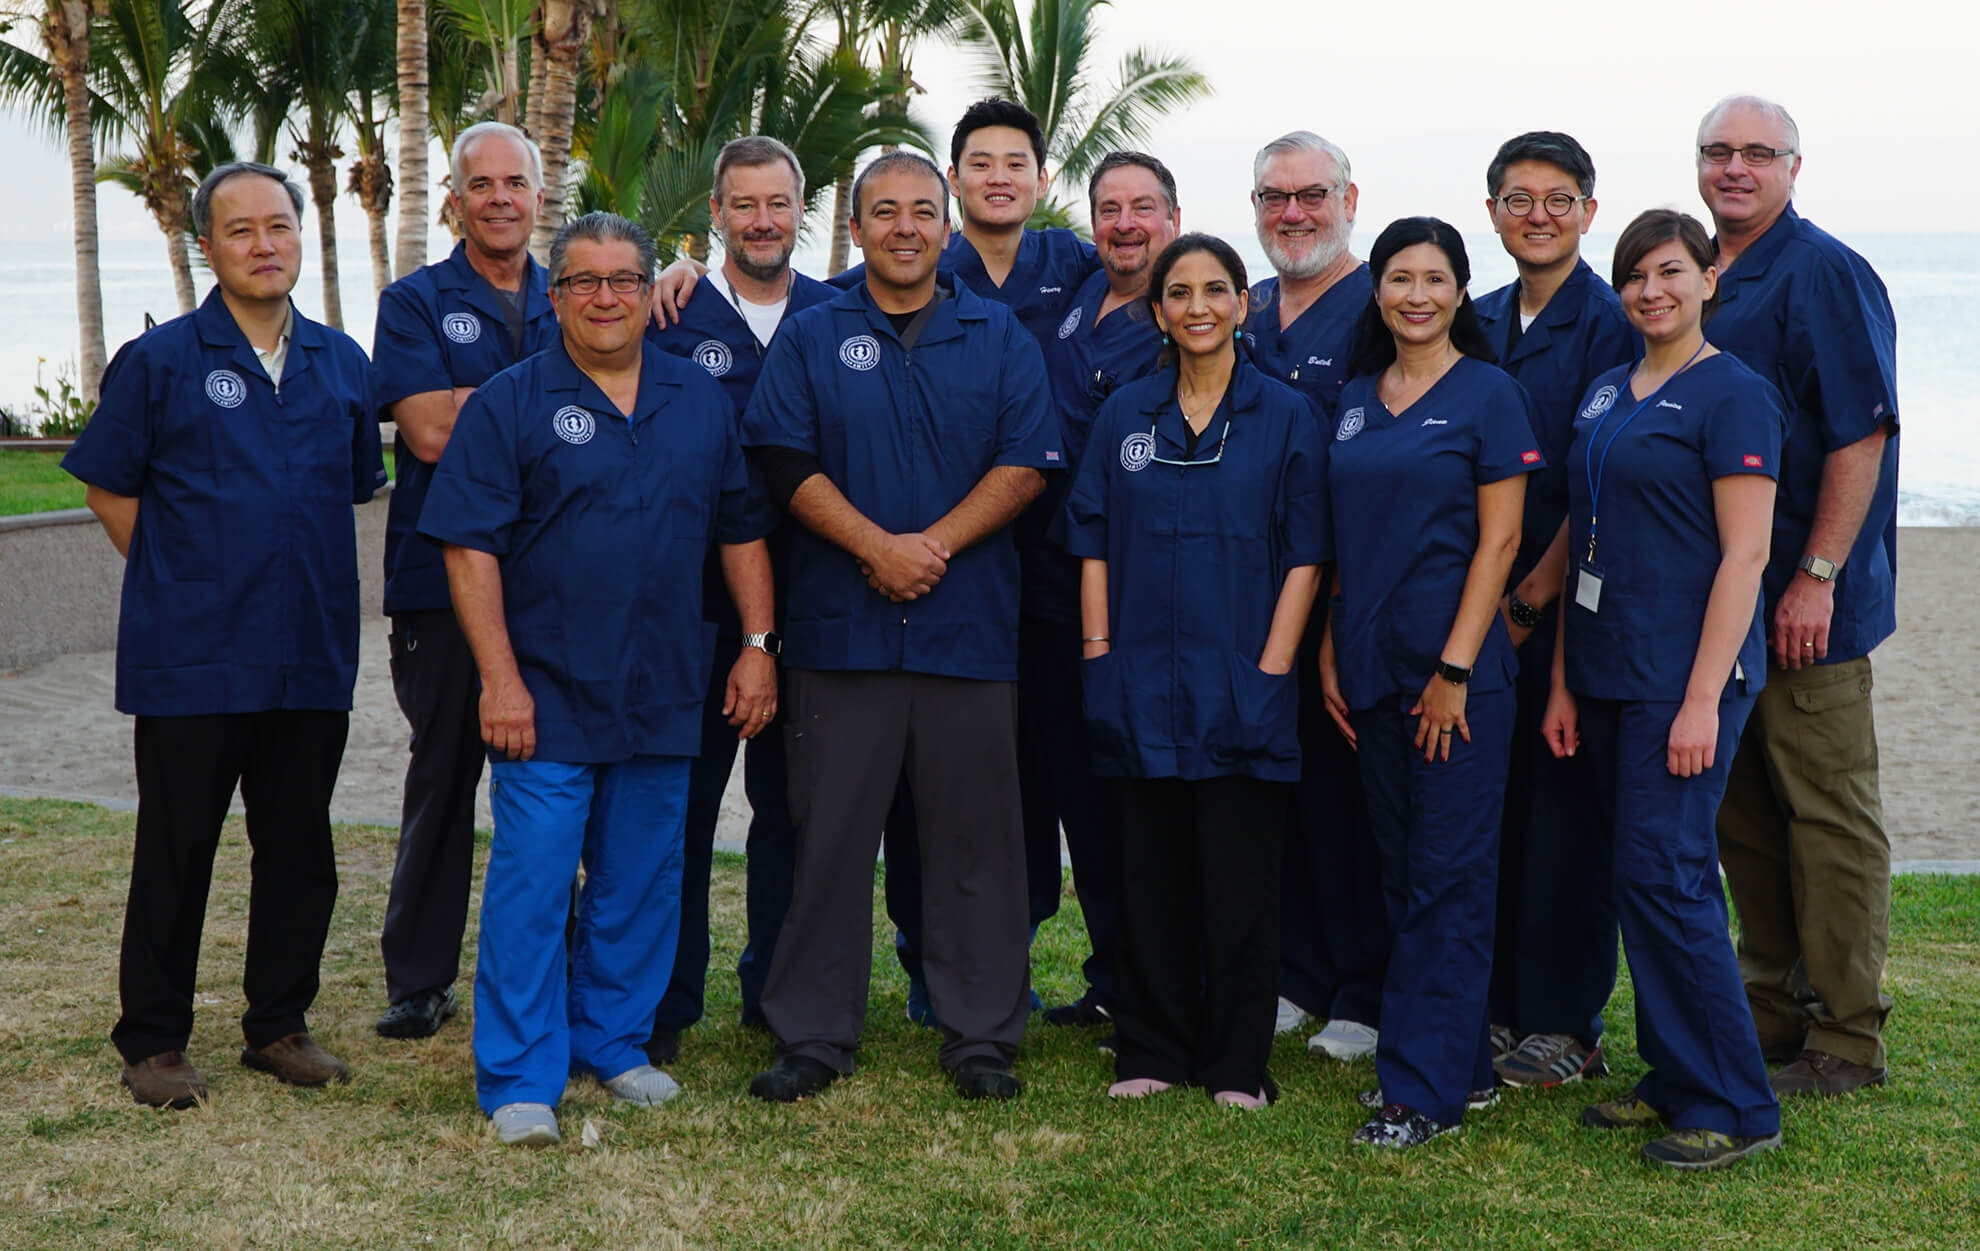 MEETING OF THE MINDS: Dr. Kianor Shah (front row, second from left) at the Academy of Minimally Invasive Implantology in Puerto Vallarta, Mexico